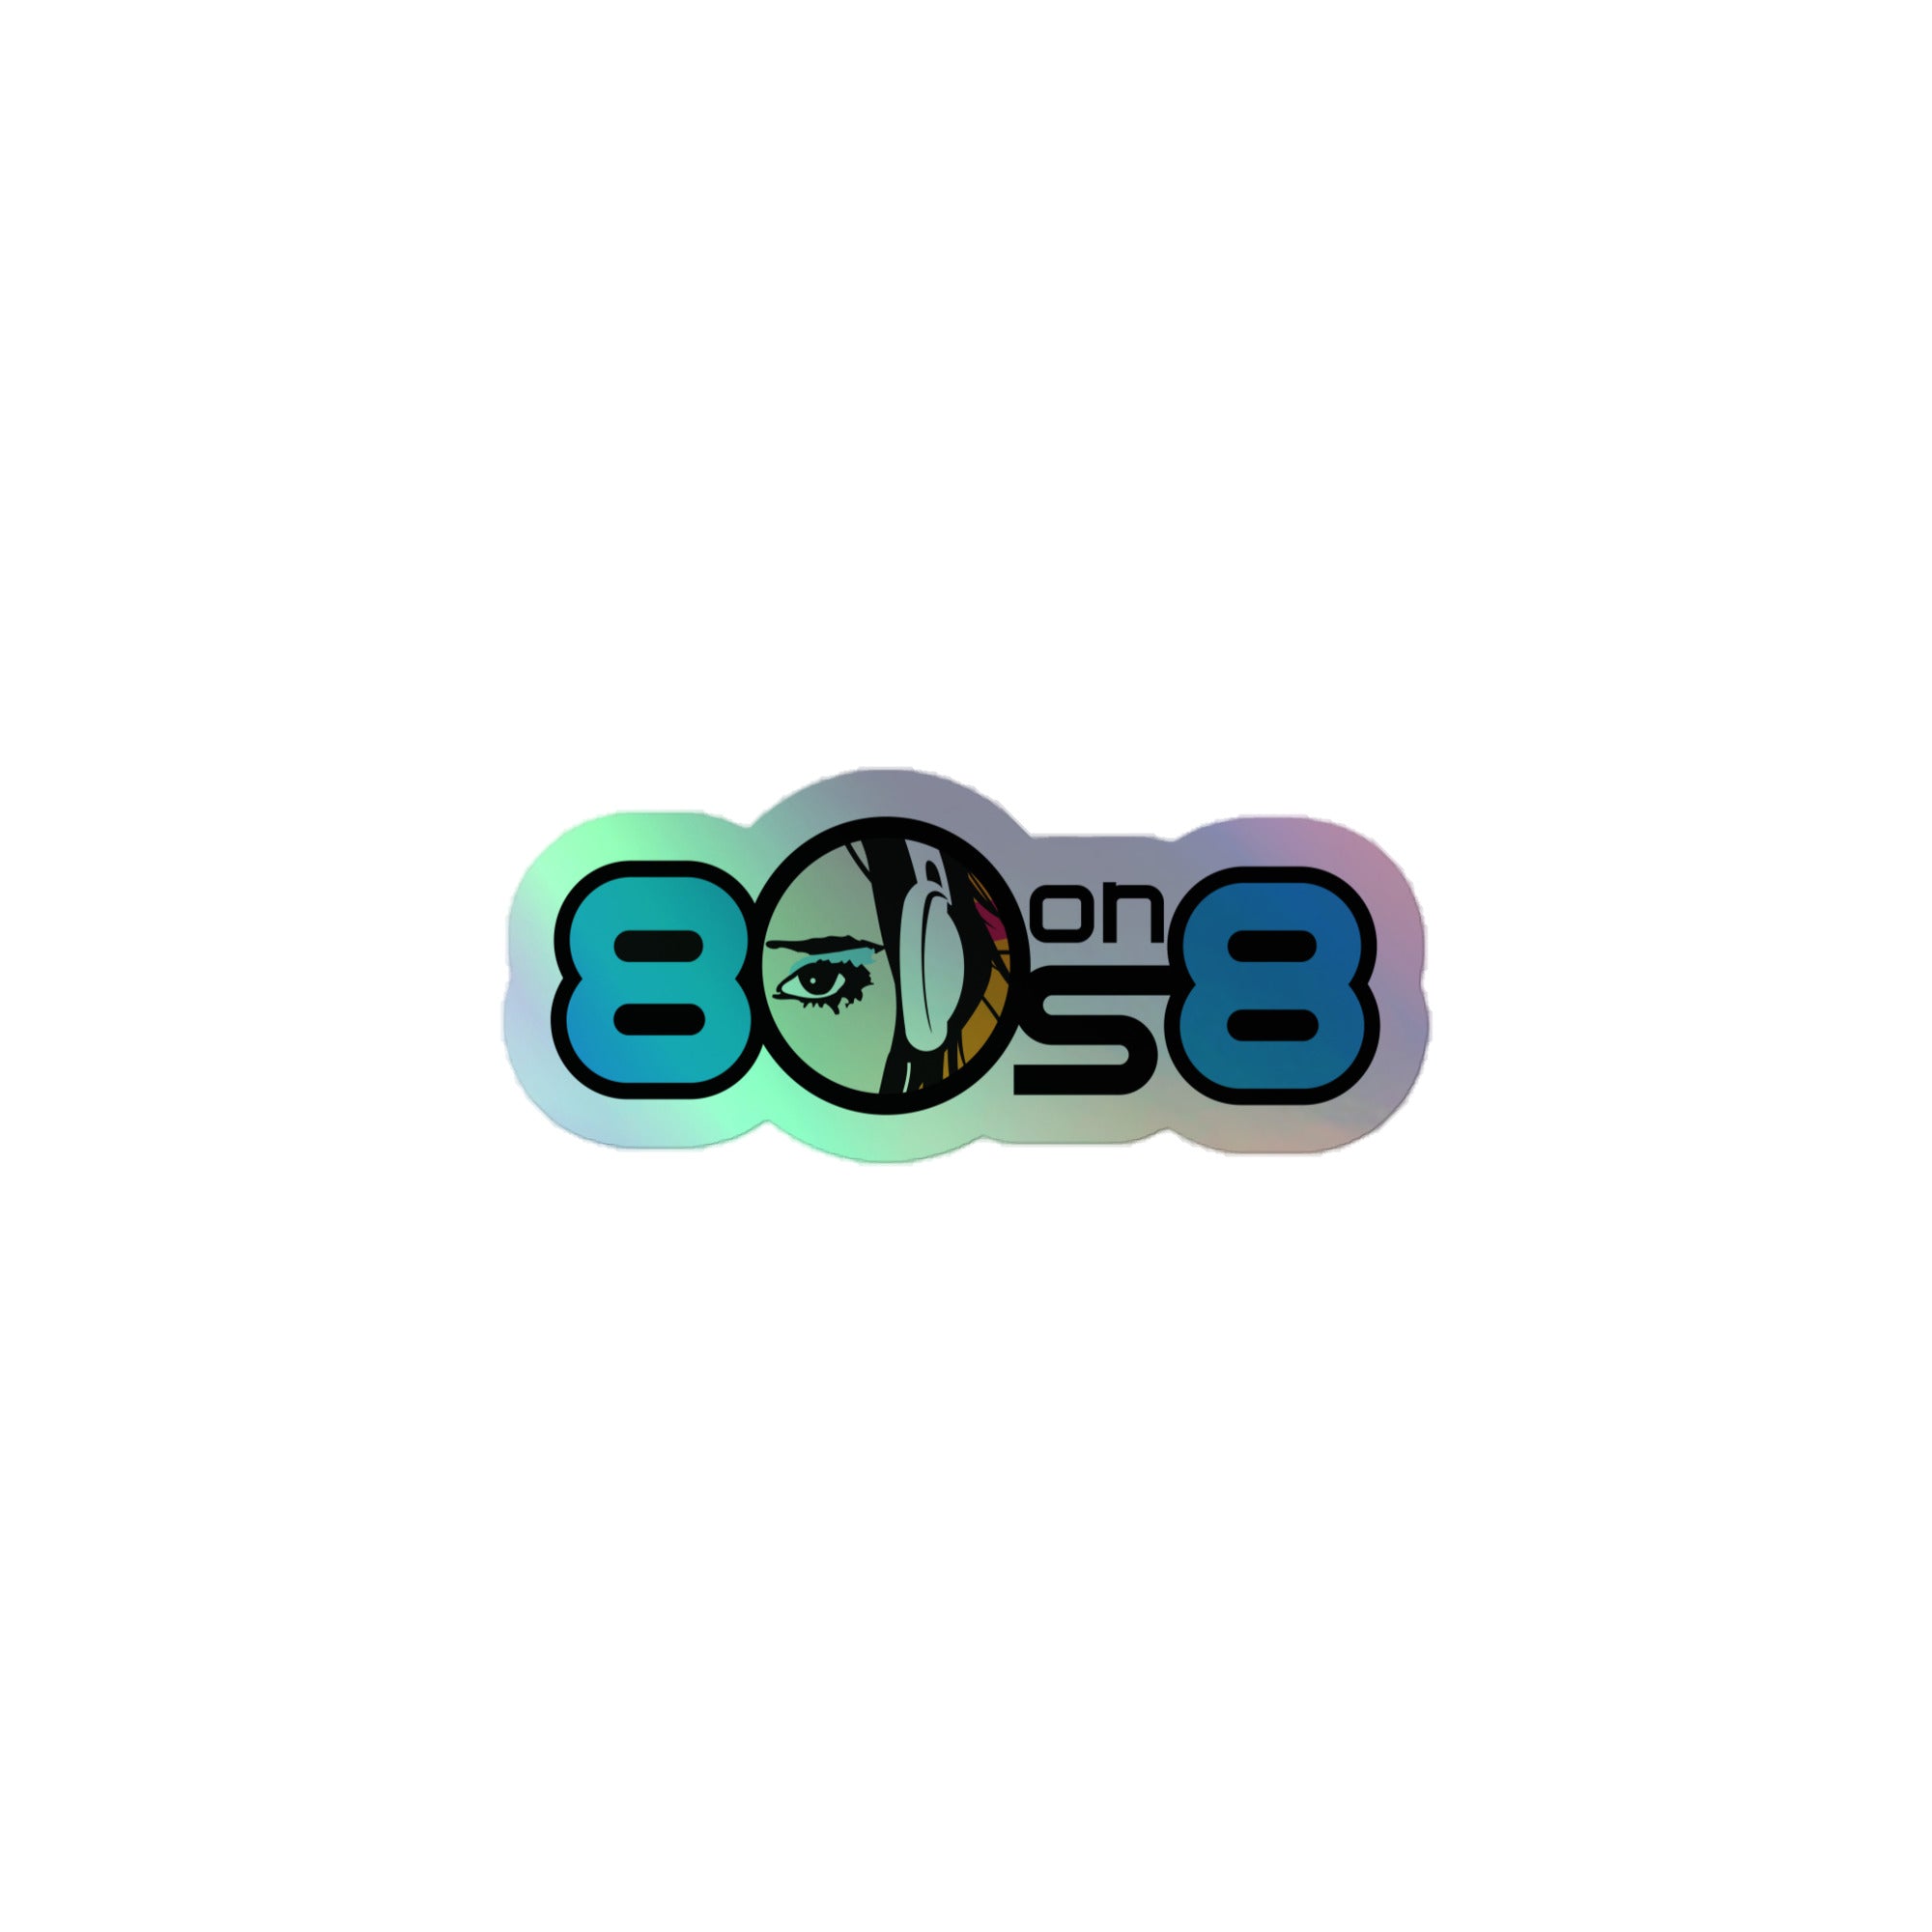 80s on 8: Holographic Sticker